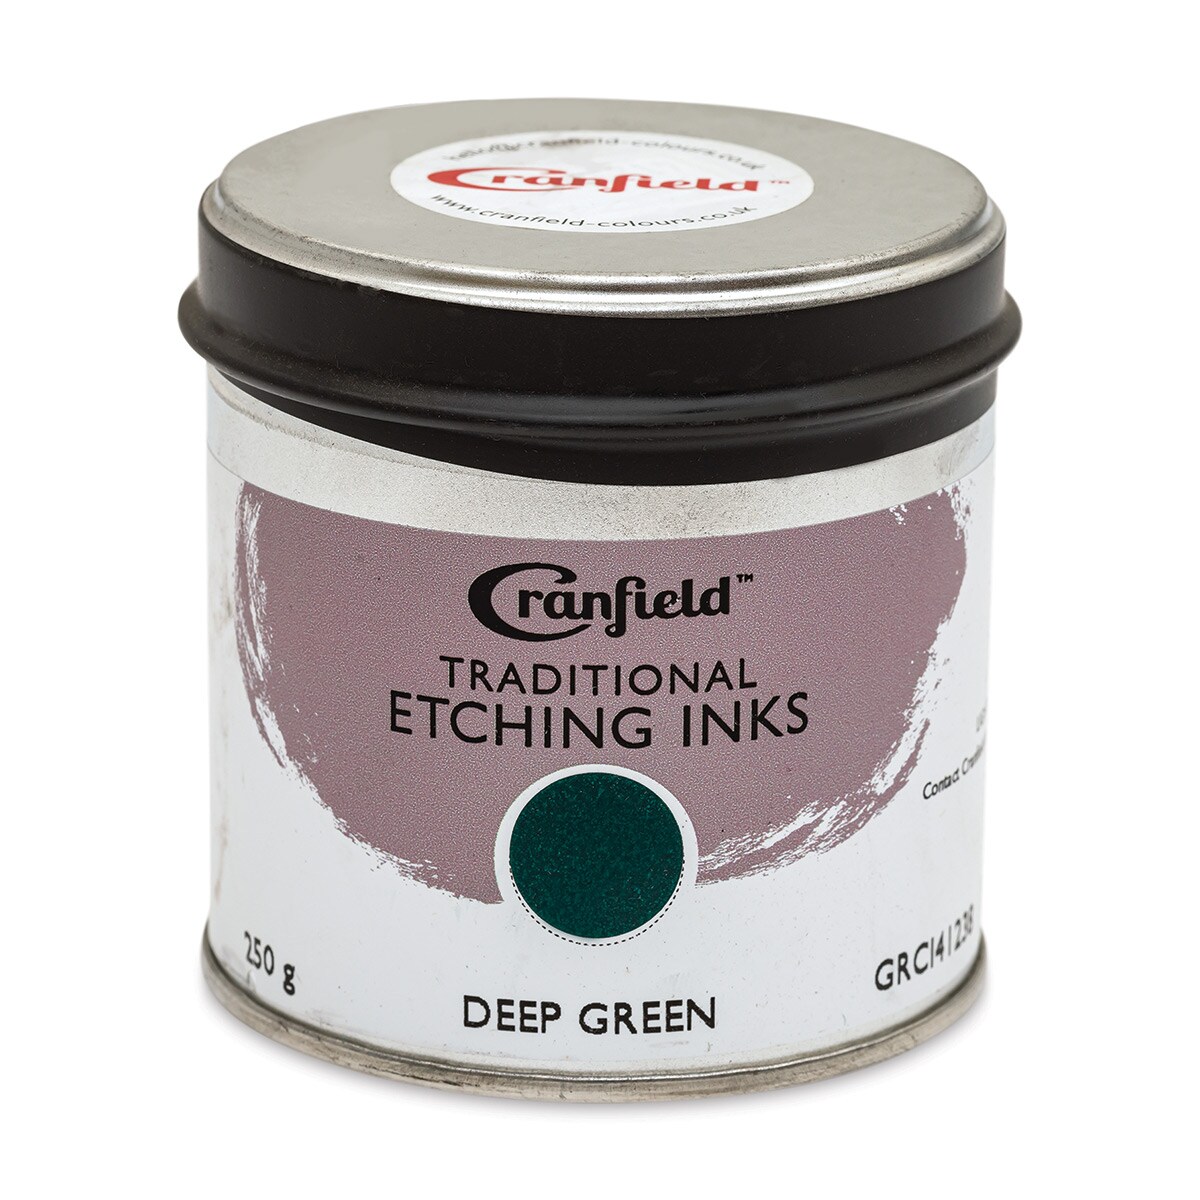 Cranfield Traditional Etching Ink - Deep Green, 250 g